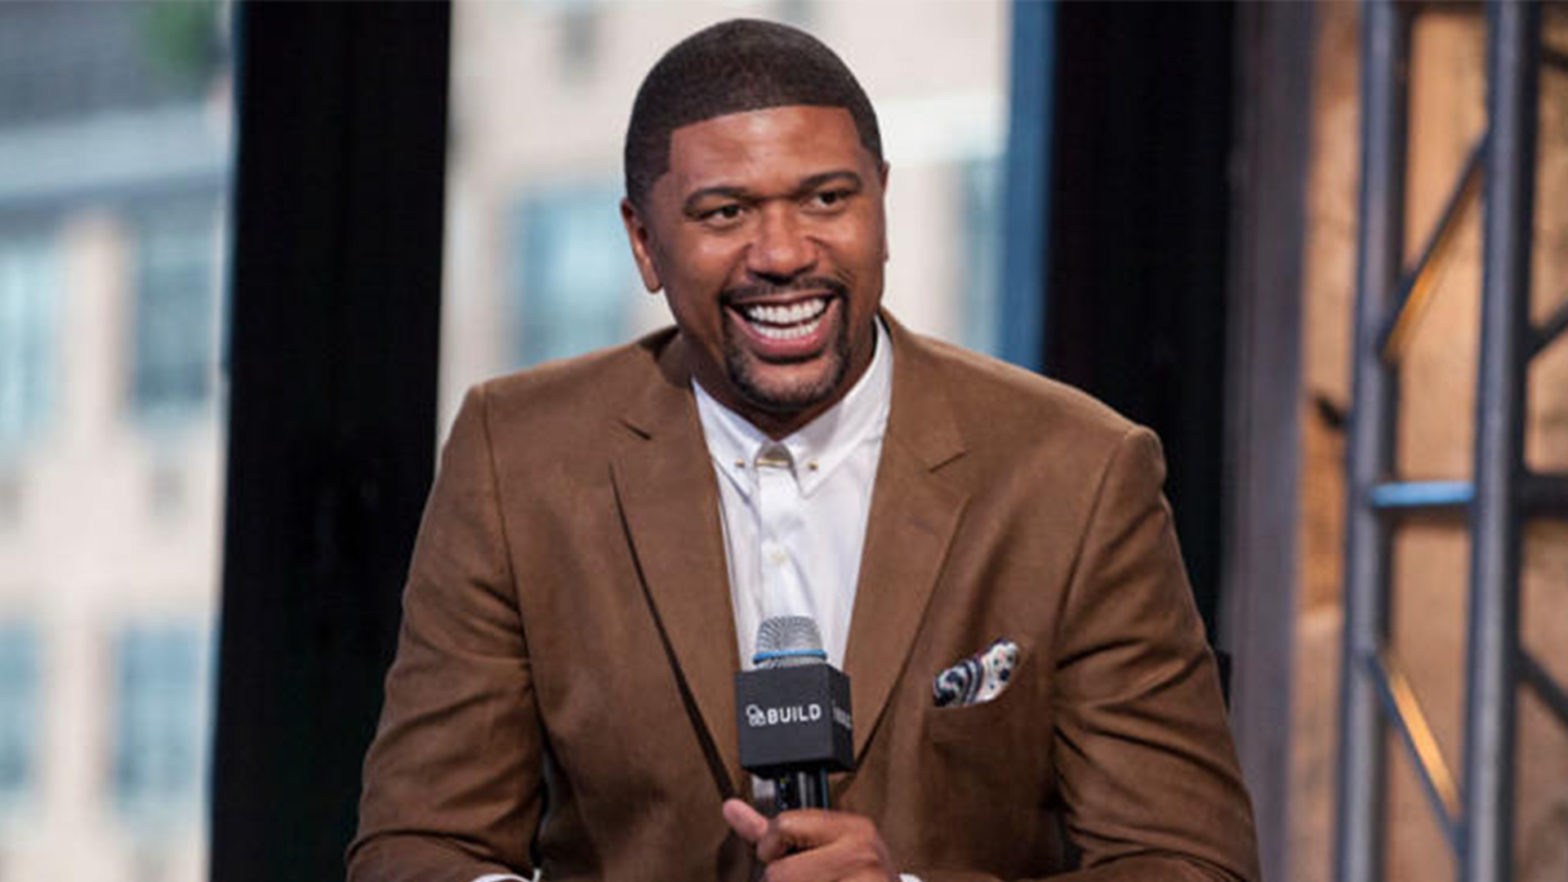 Jalen Rose Recalls The Struggle Before Building His Estimated $50M Fortune — 'My Mother Lights Got Cut Off…I Need To Do Something'